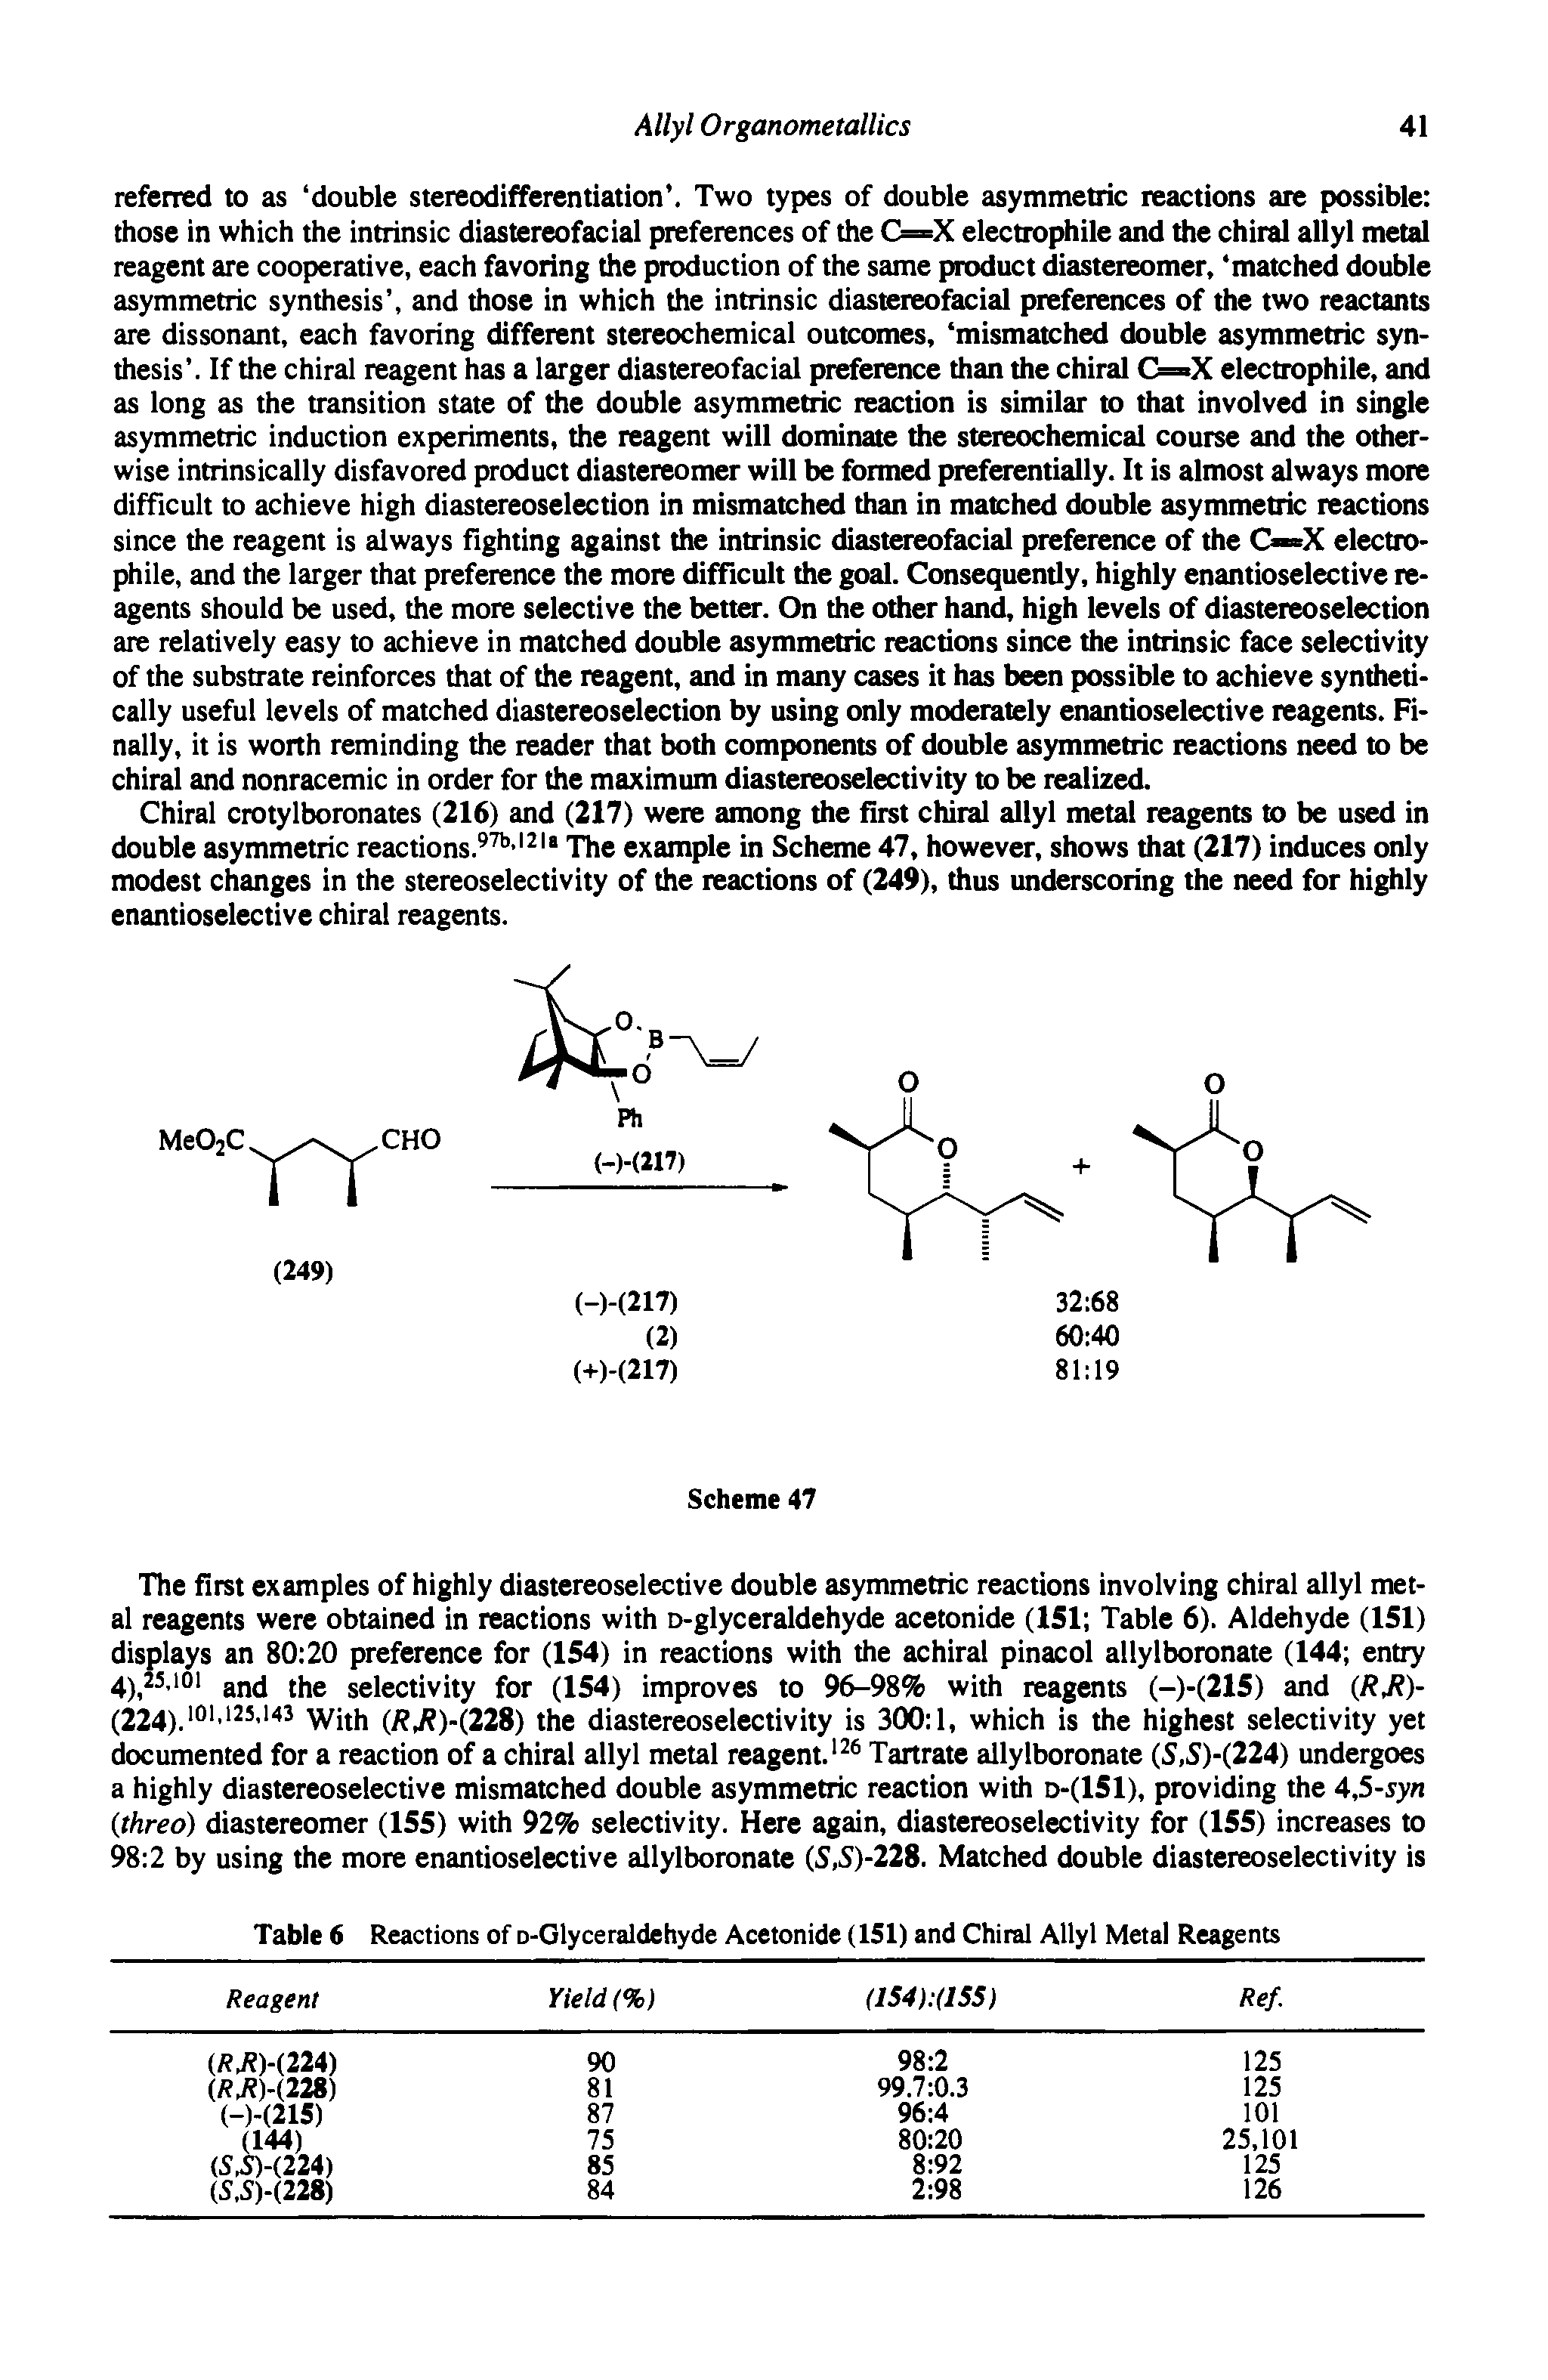 Table 6 Reactions of D-Glyceraldehyde Acetonide (151) and Chiral Allyl Metal Reagents...